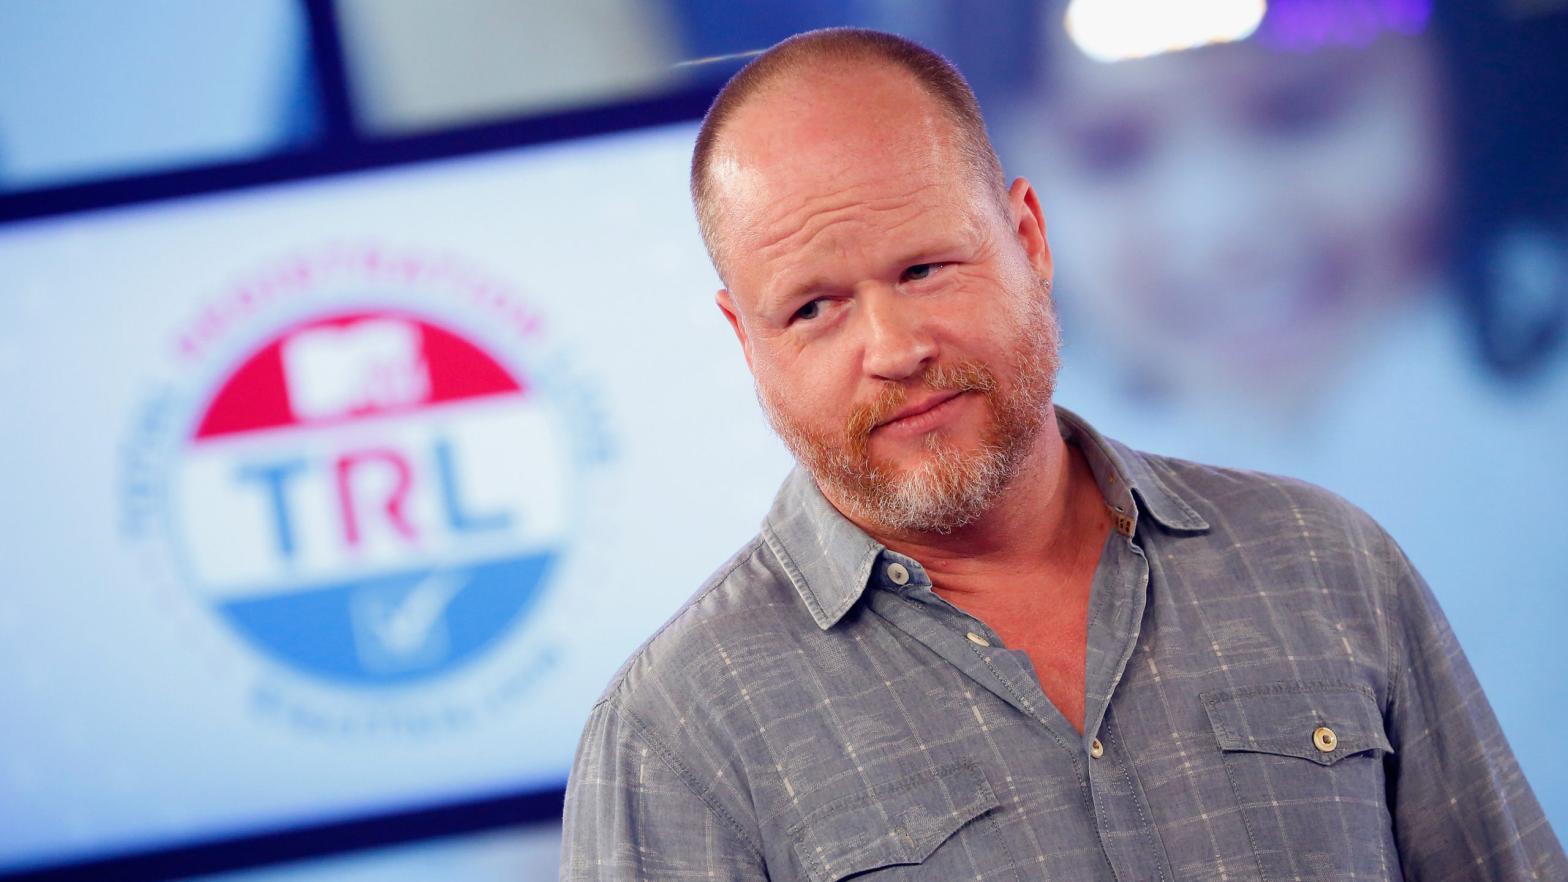 Joss Whedon telling people to vote on MTV ahead of the 2016 election. Fun times. (Photo: Brian Ach/Getty, Getty Images)